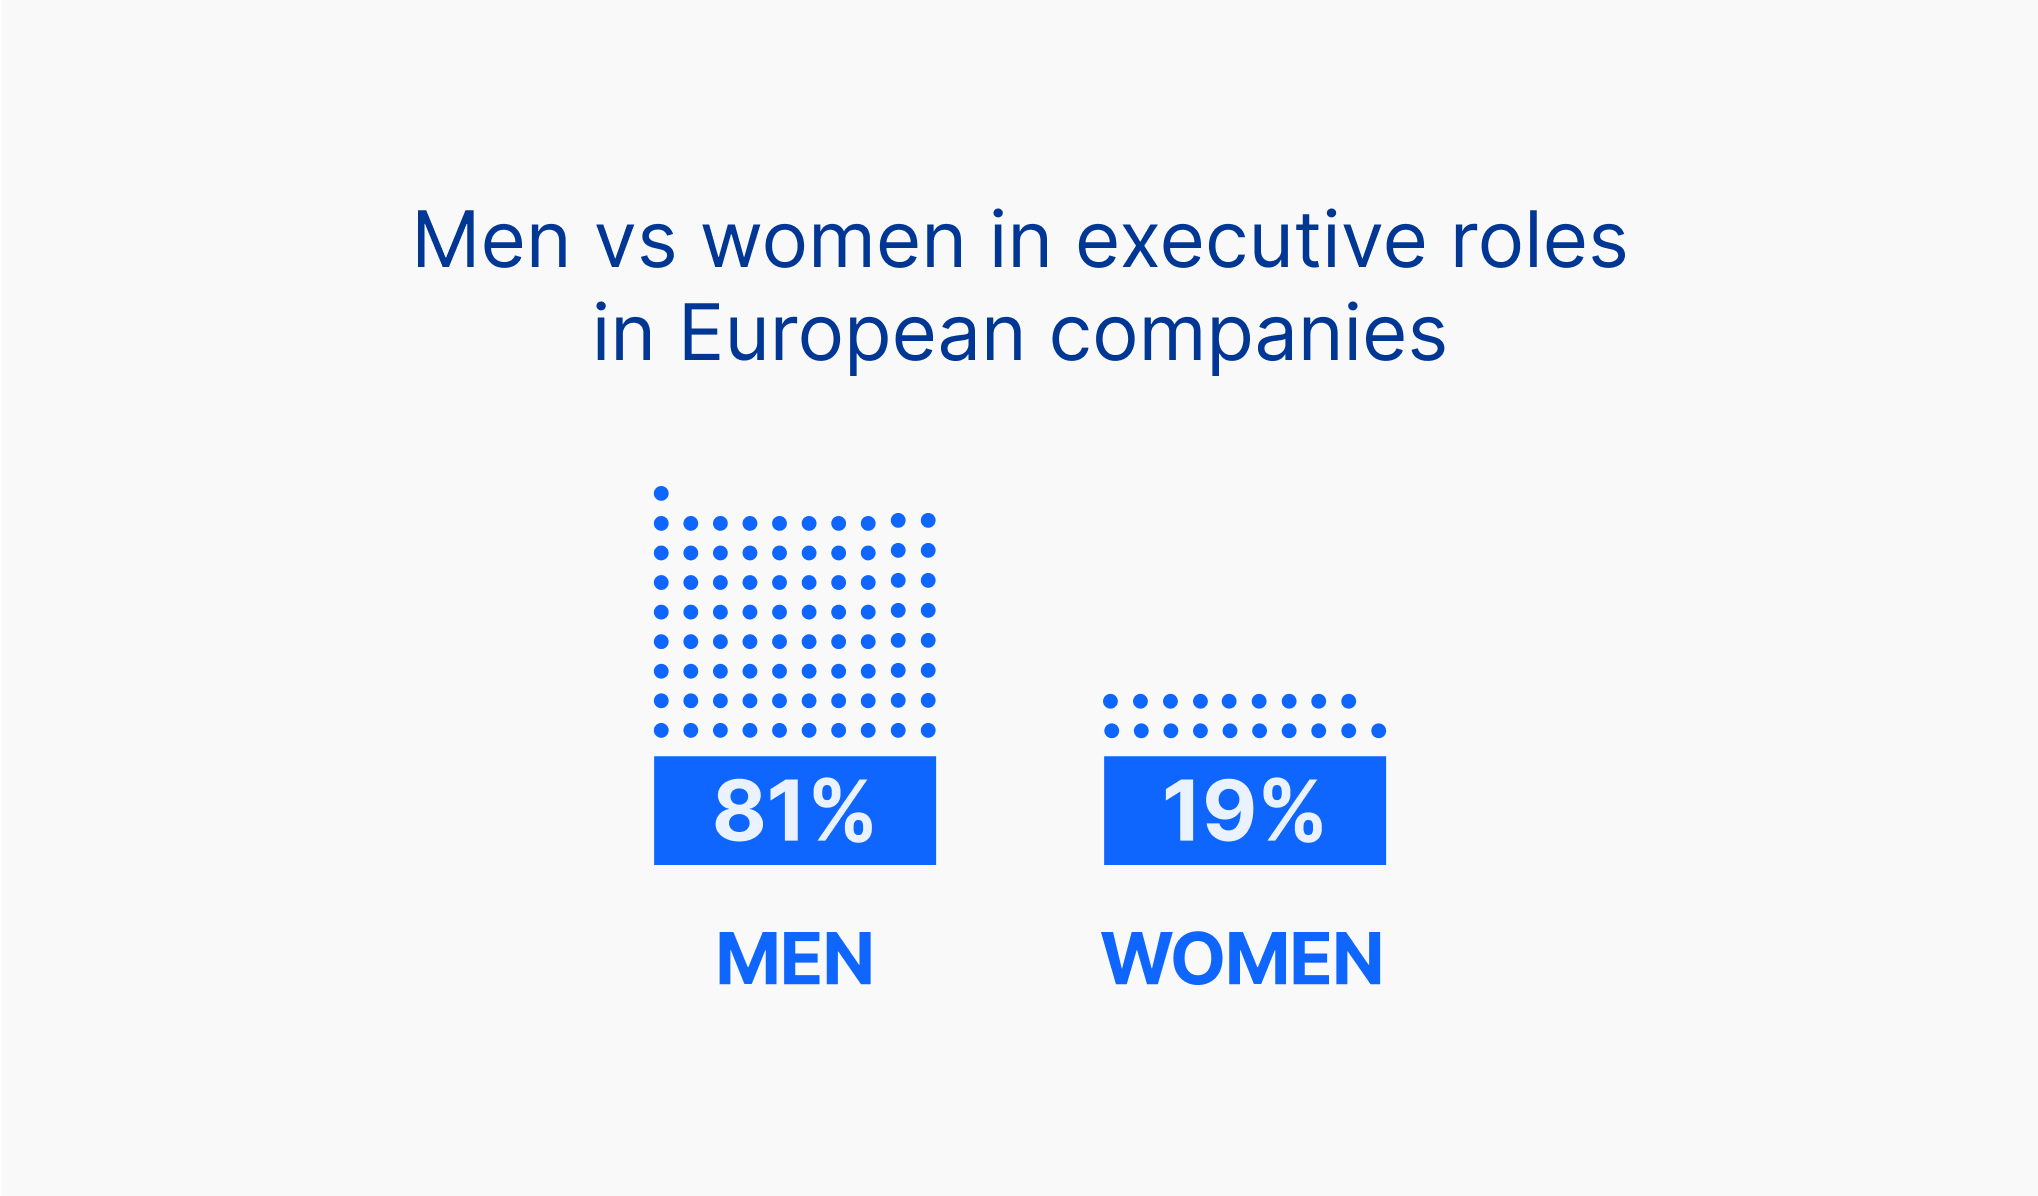 Graph showing executive roles in Europe are held 81% by men, and 19% by women